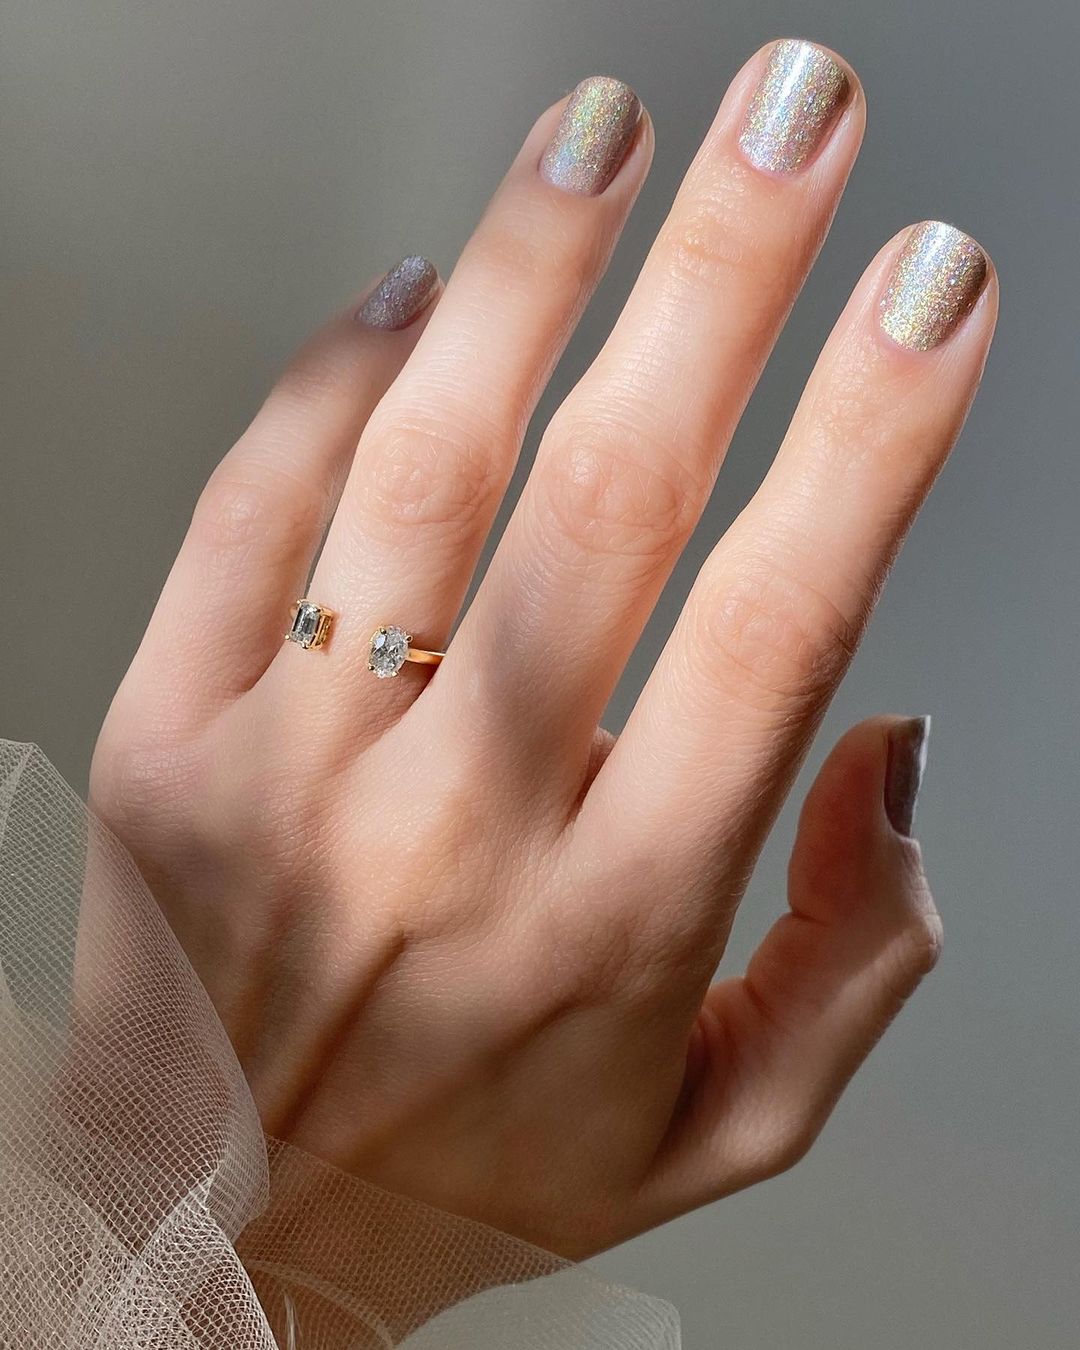 The Unexpected Nail Trend That Will Be Everywhere This Summer